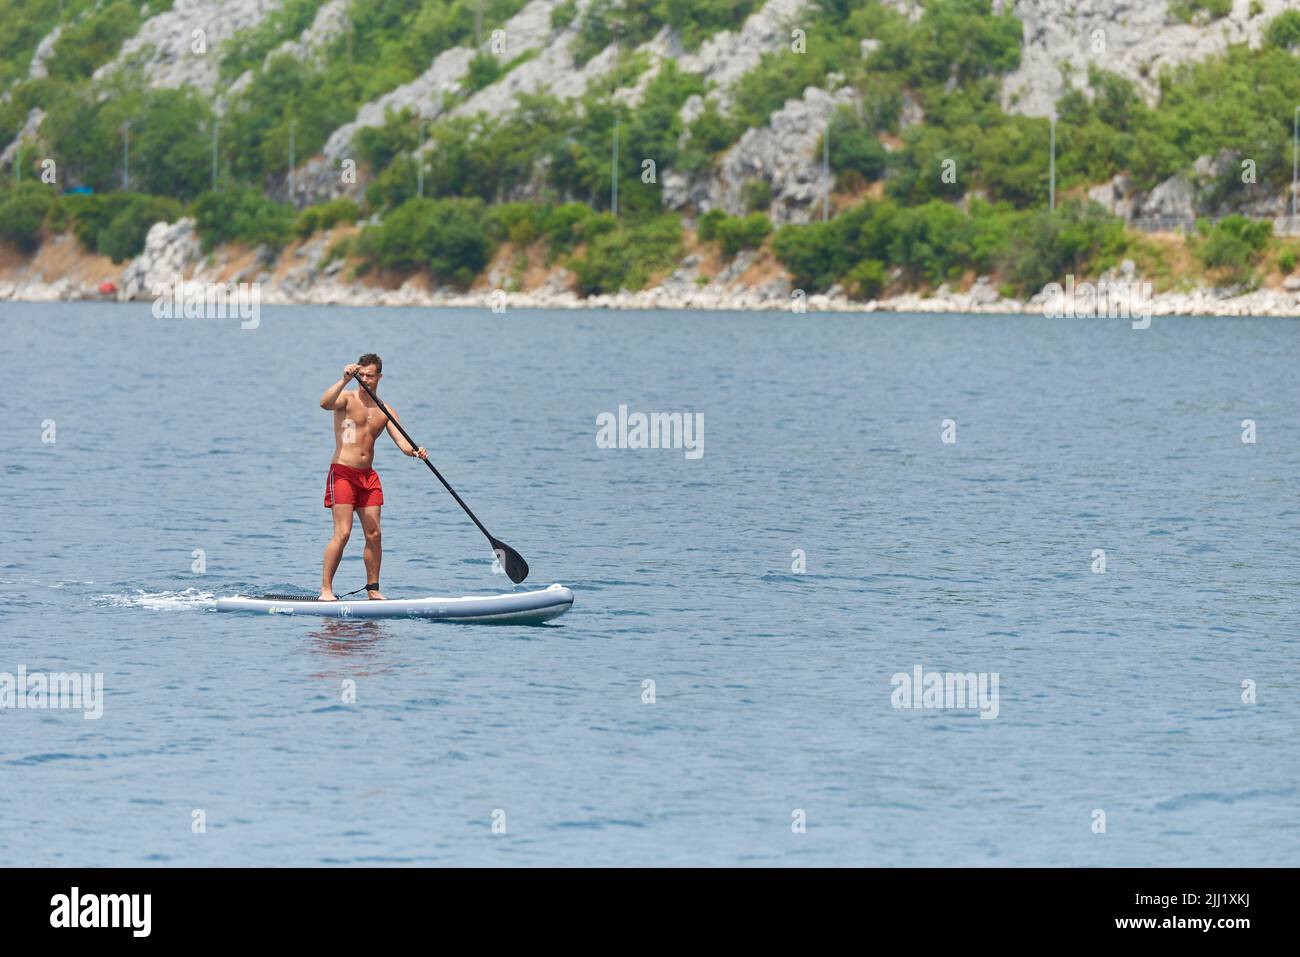 Young man swims on a sub board in the Adriatic Sea Stock Photo